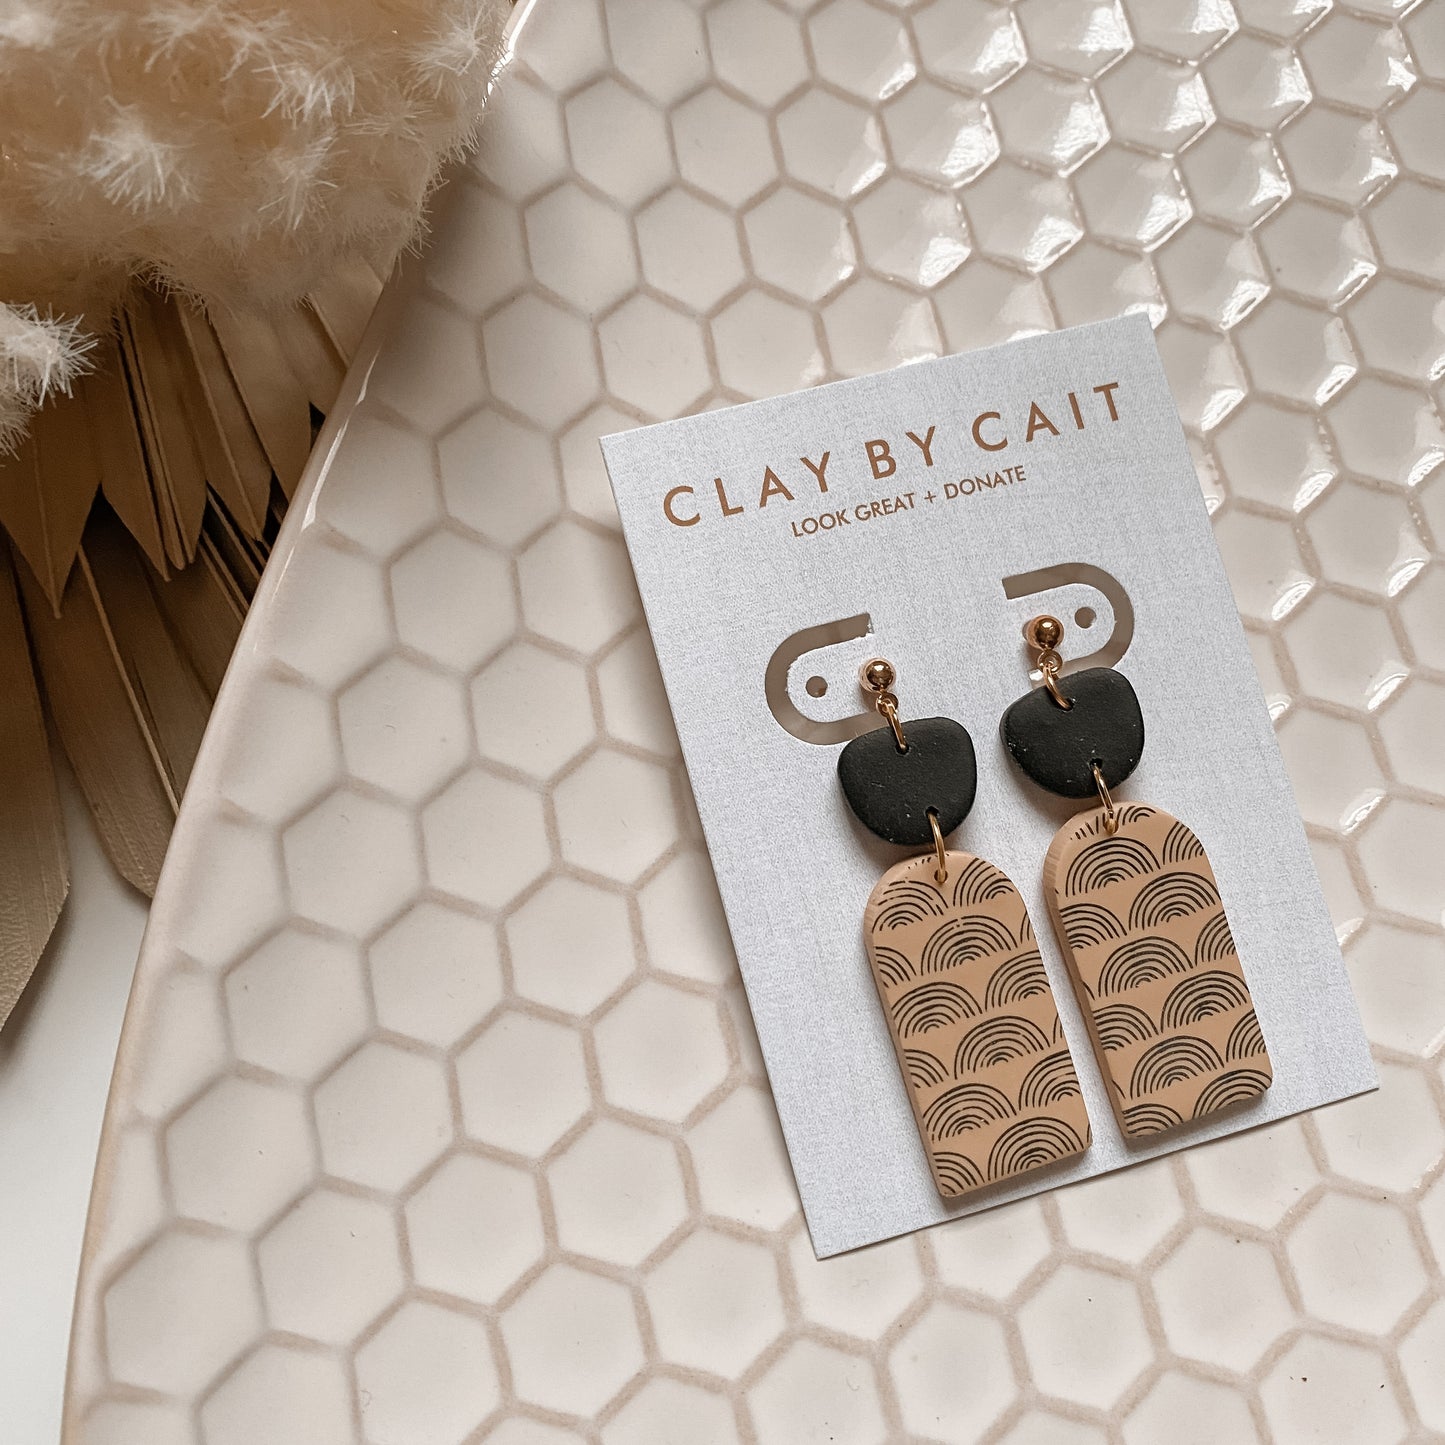 Clay by Cait ~The Beck Statement Earring